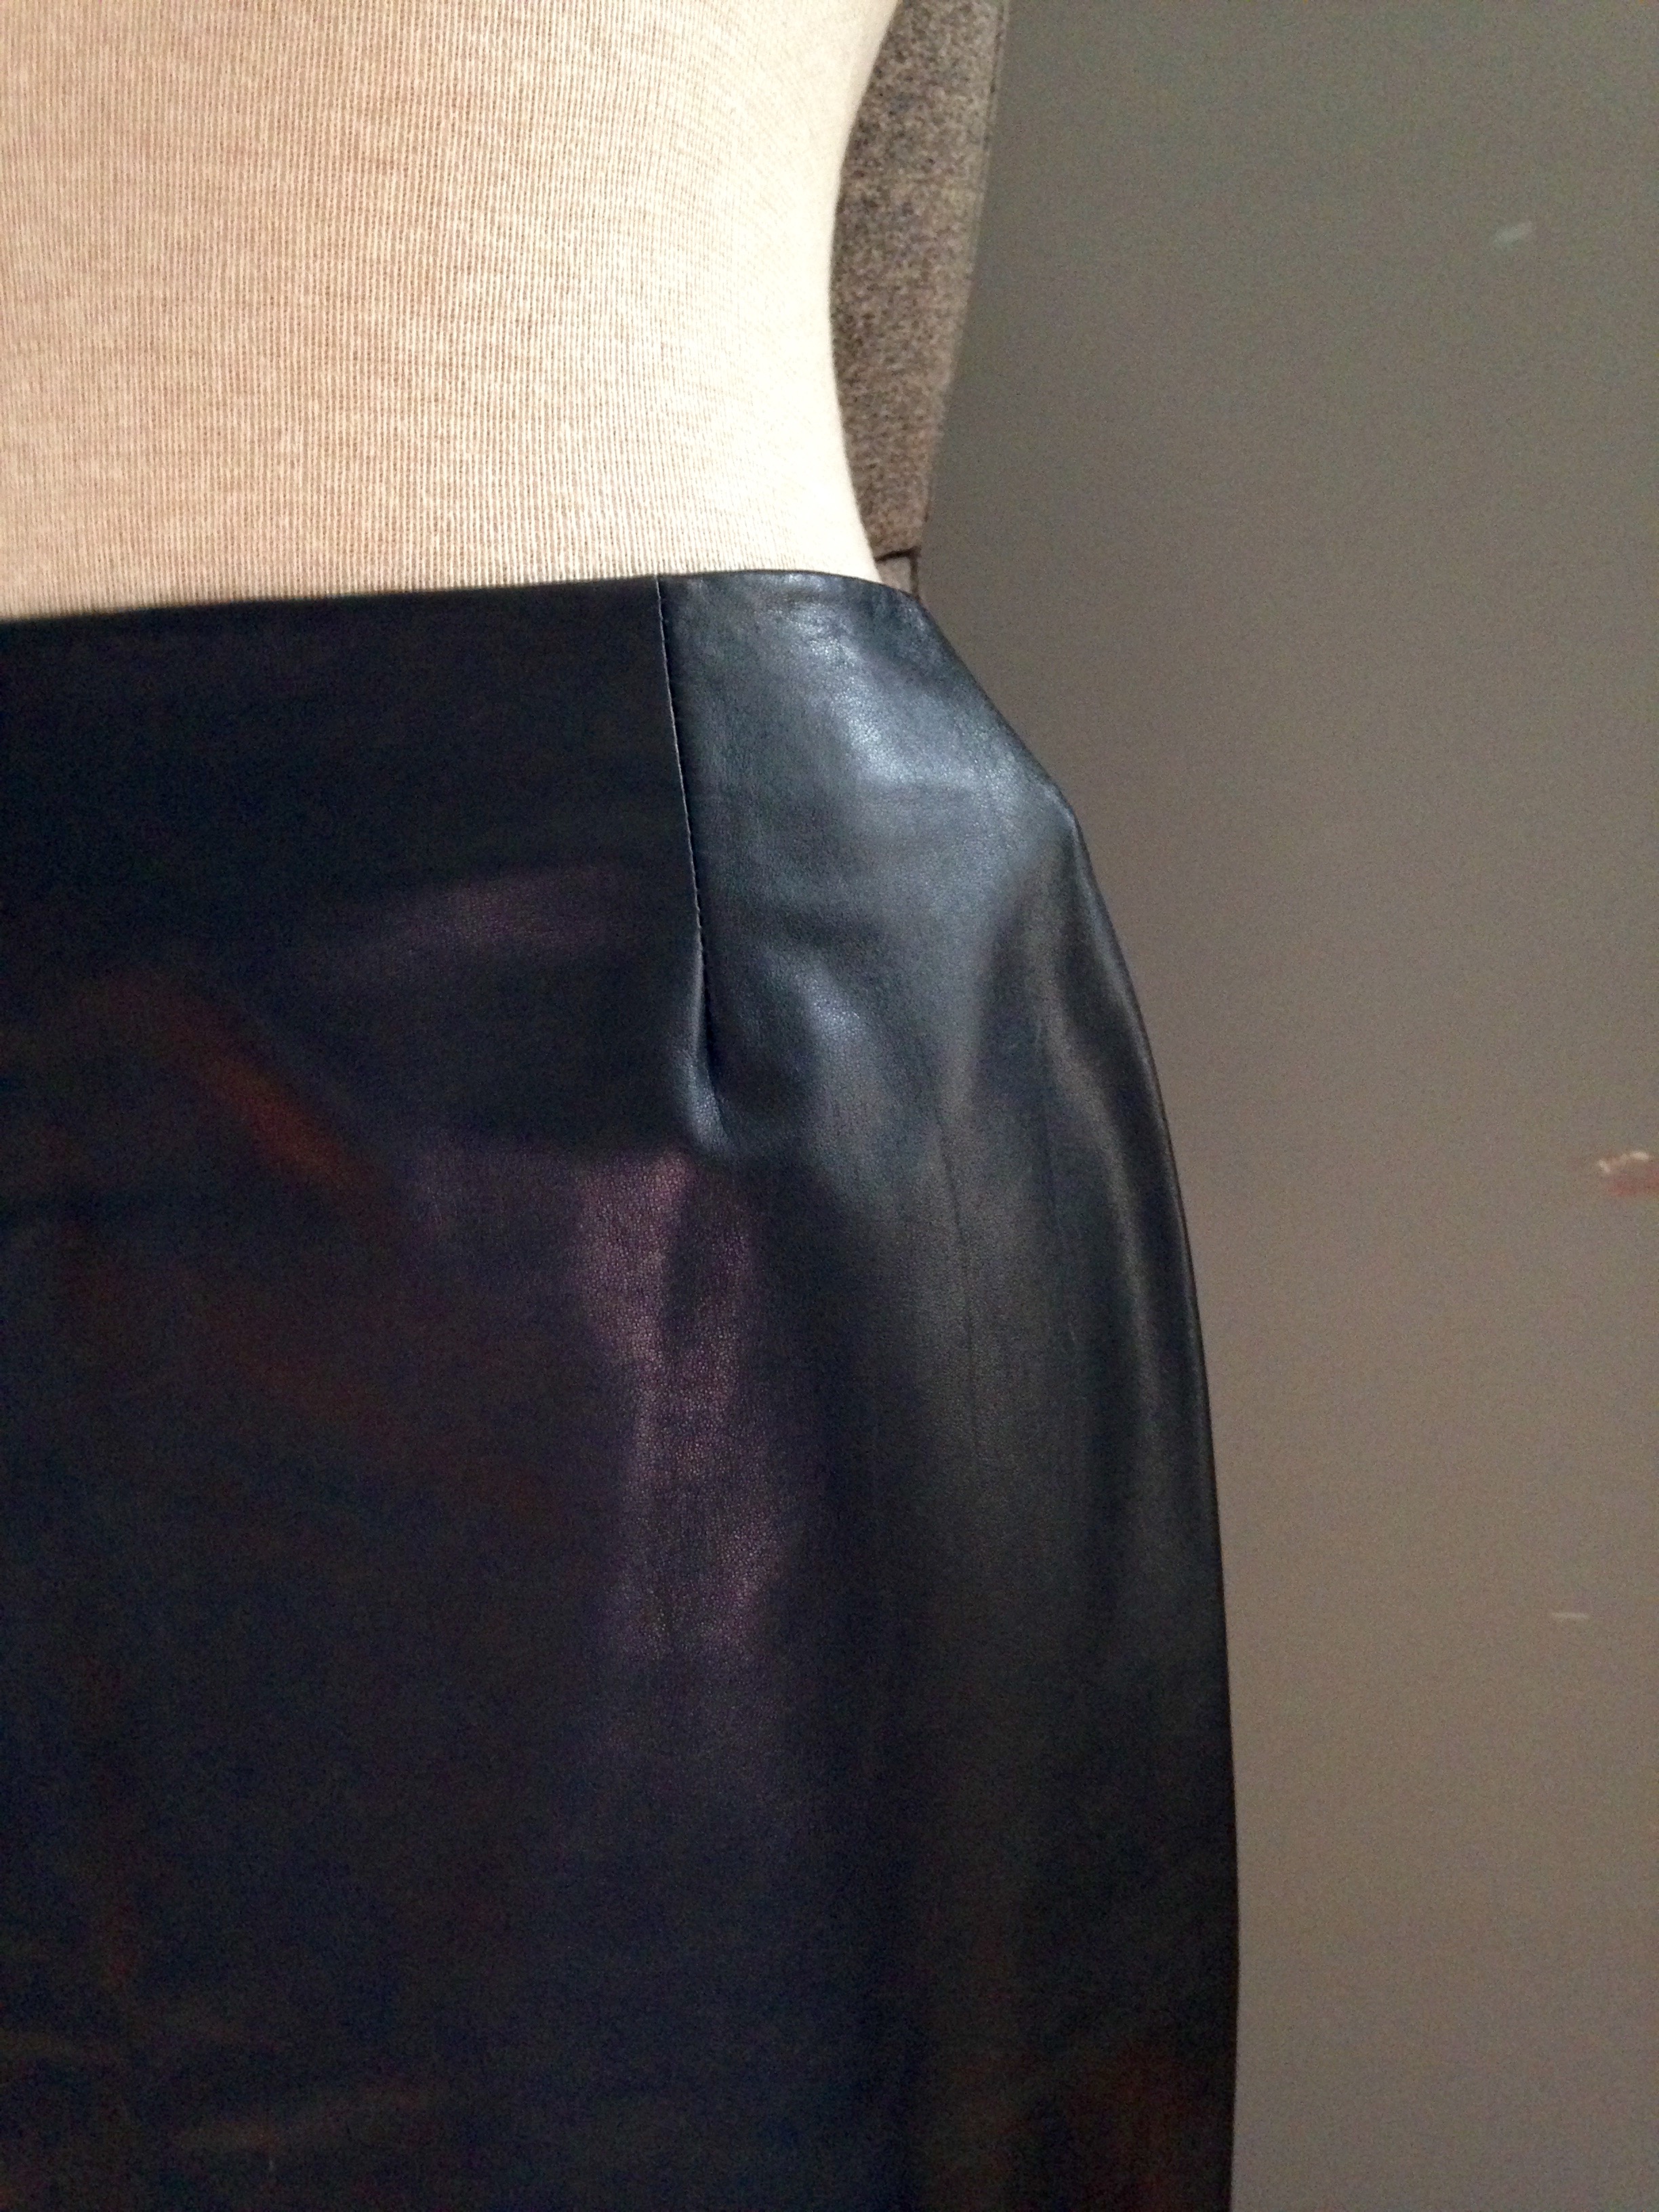 vintage black leather skirt with bottom side zips $49 - bottoms ...